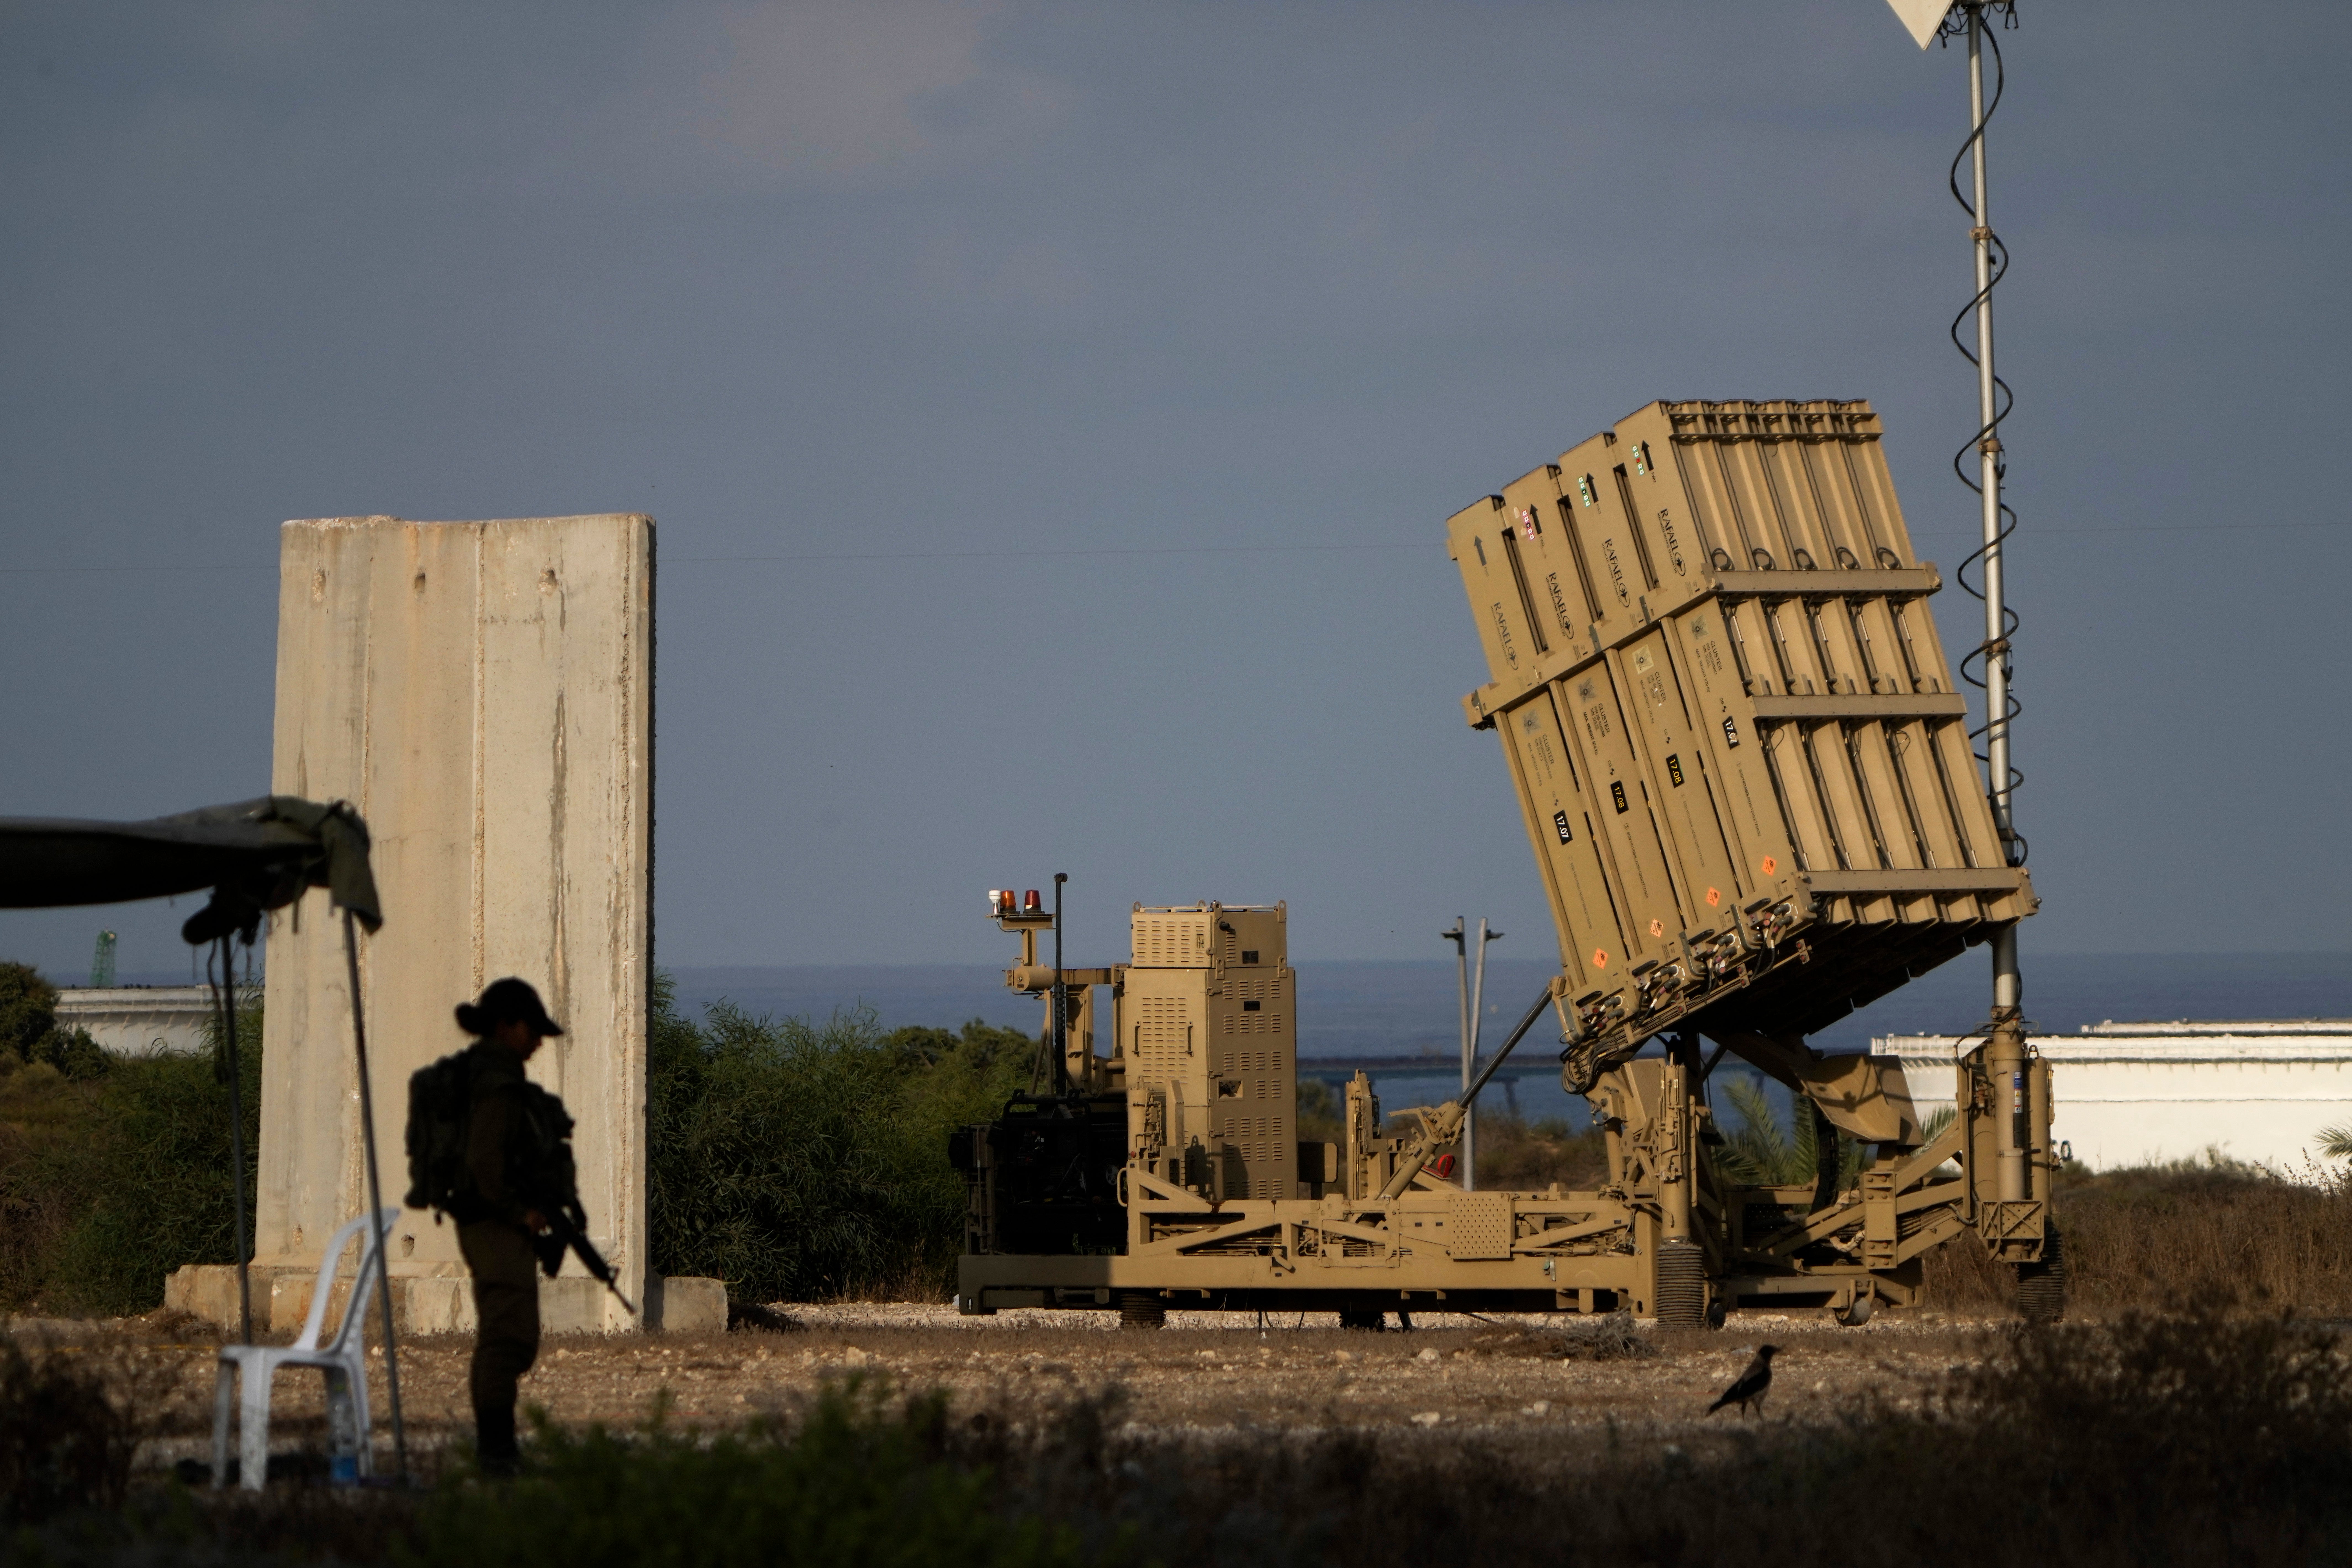 A battery of Tamir interceptor missiles, forming part of Israel’s Iron Dome missile defence system, in Ashkelon, southern Israel